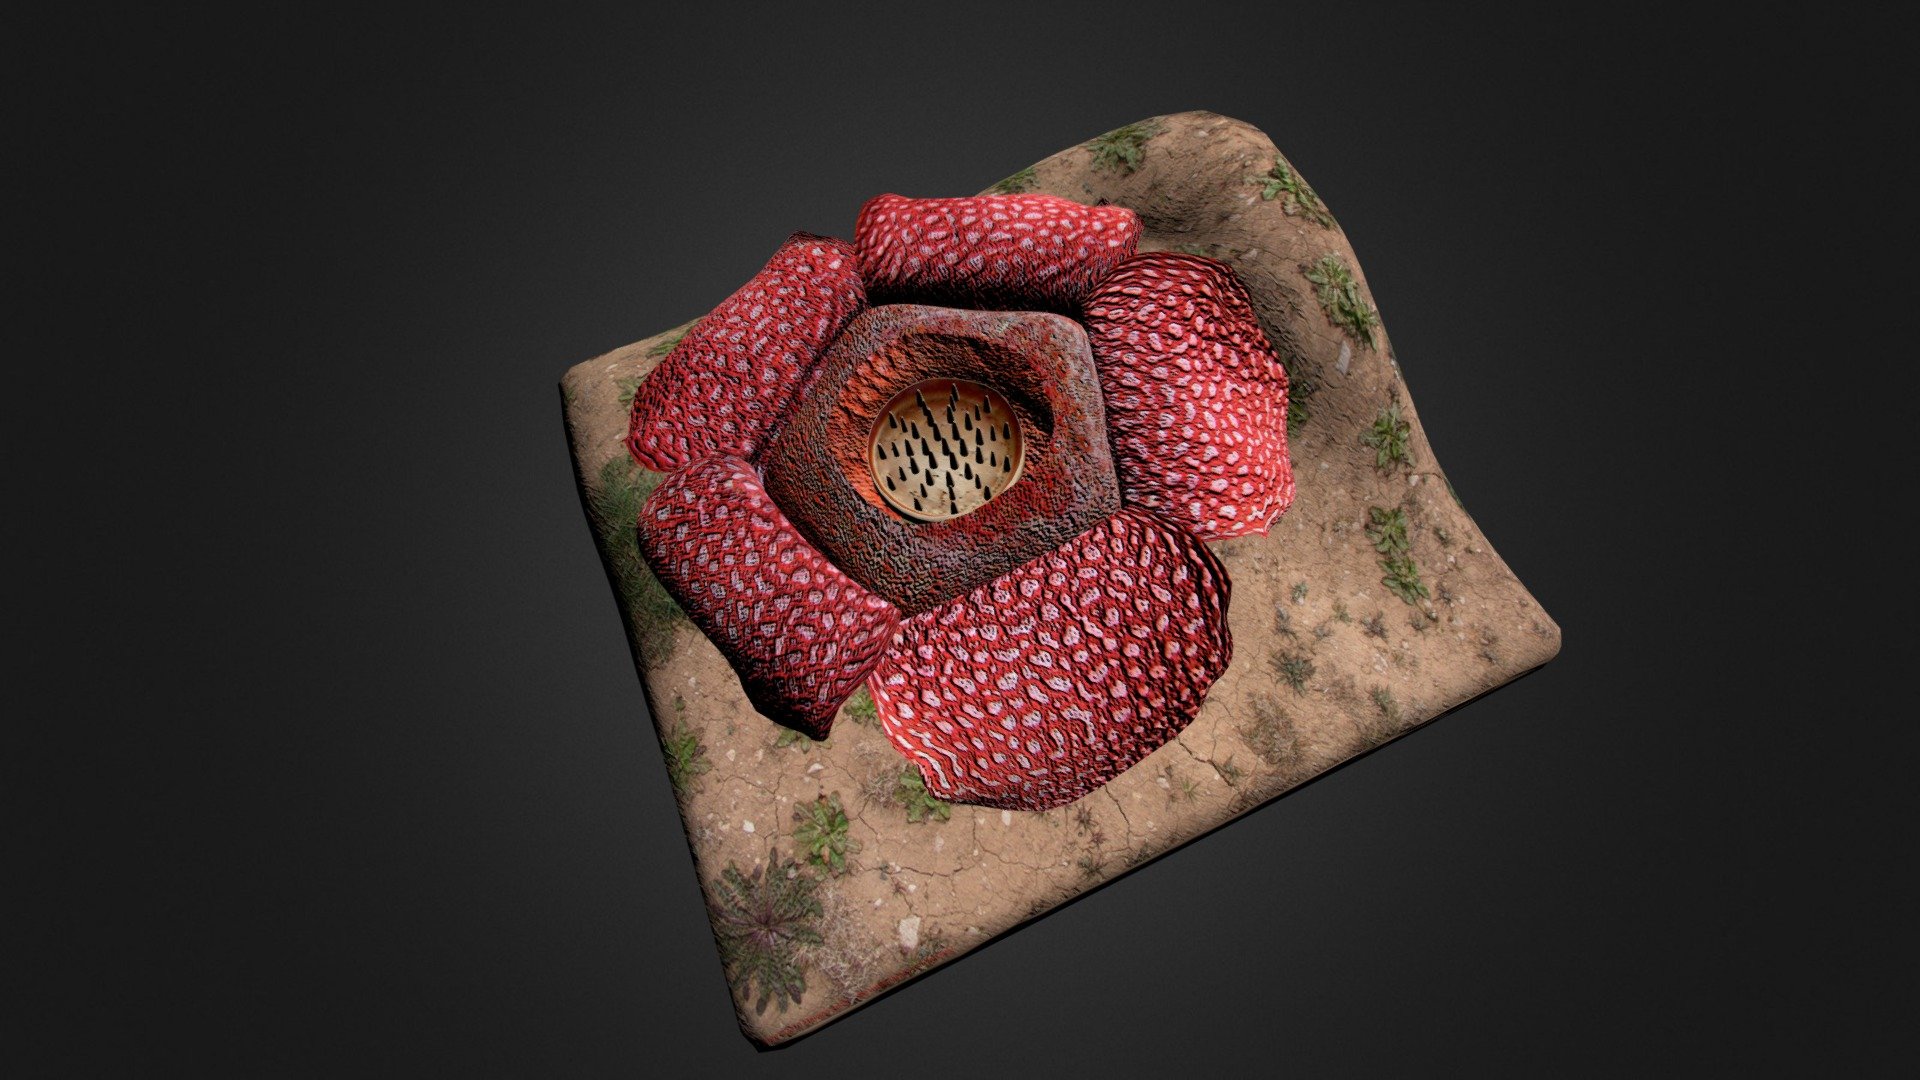 bigges flower from bengkulu,sumatra, indonesia..

if you want to know more about the information and download rafflesia 3D model you can contact me in here.. 
habibjuwito2018@gmail.com - rafflesia arnoldi - 3D model by Habib J (@habibj) 3d model